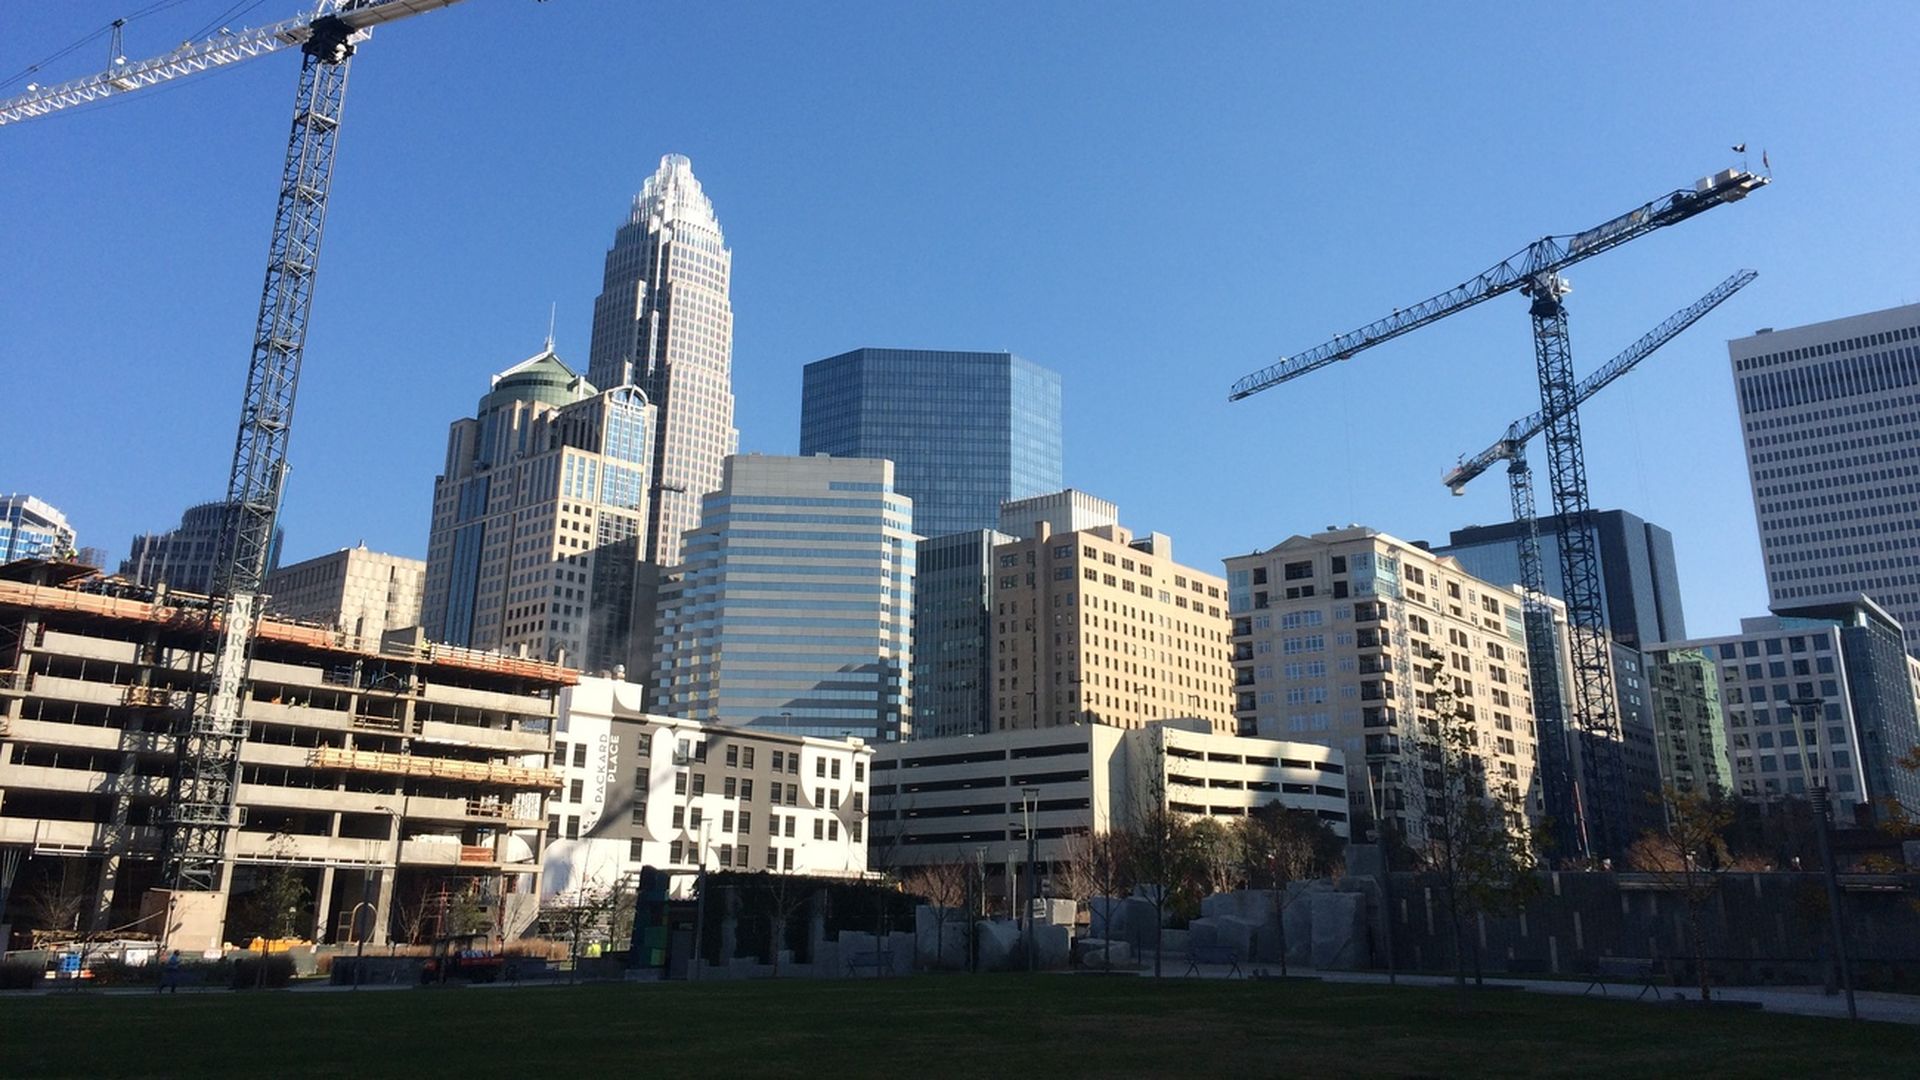 Charlotte is planning for 2040. What does that mean for today